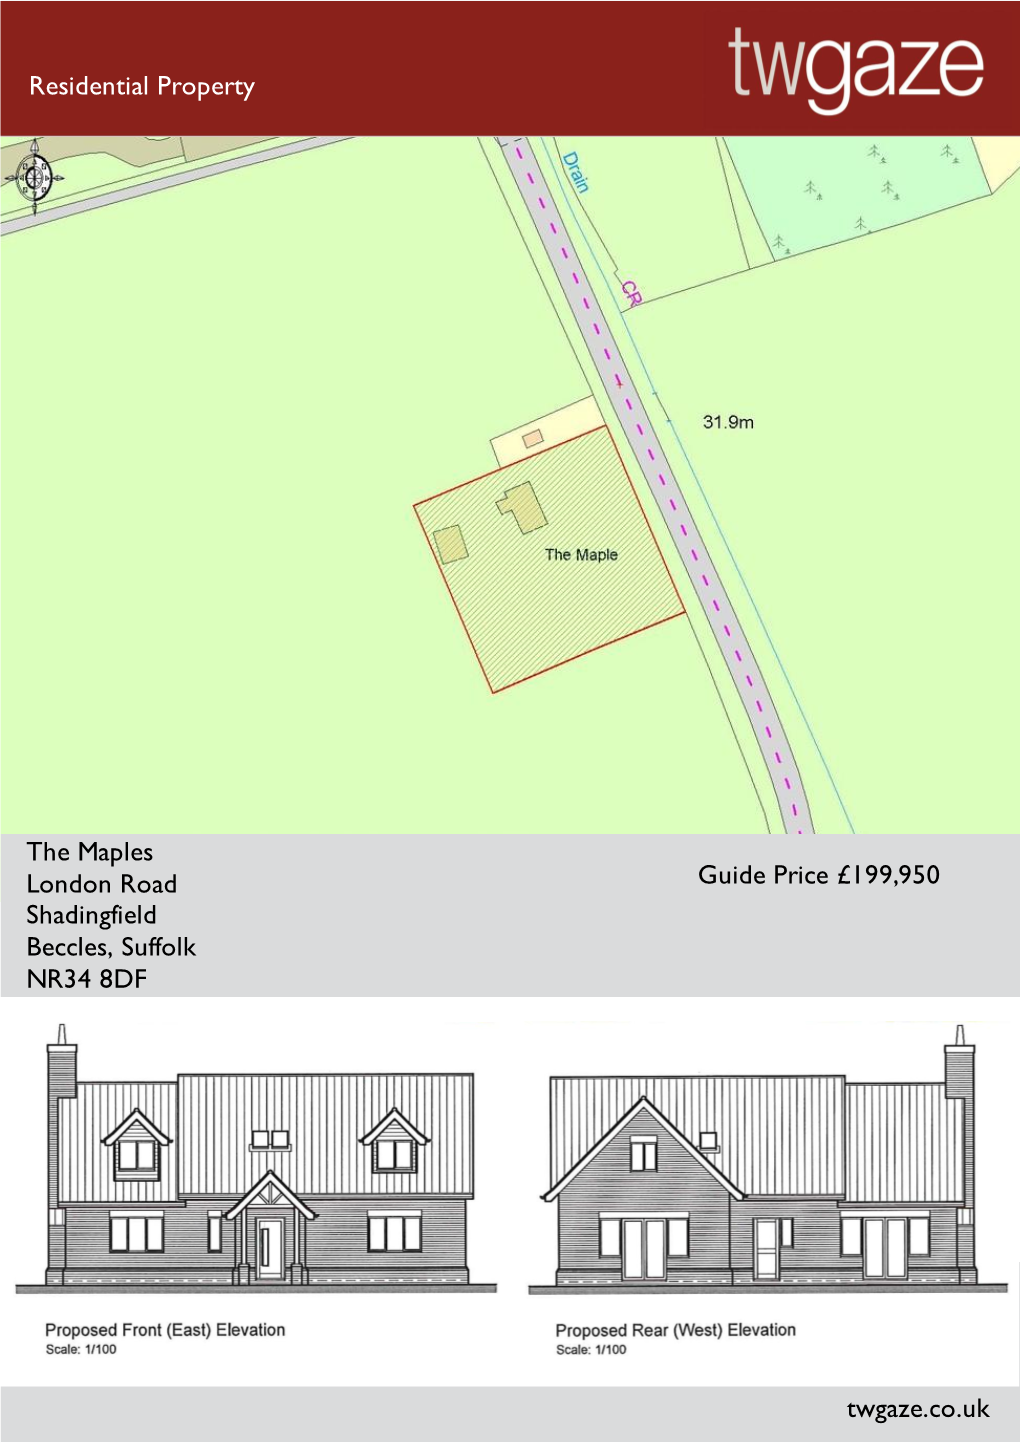 Residential Property the Maples London Road Shadingfield Beccles